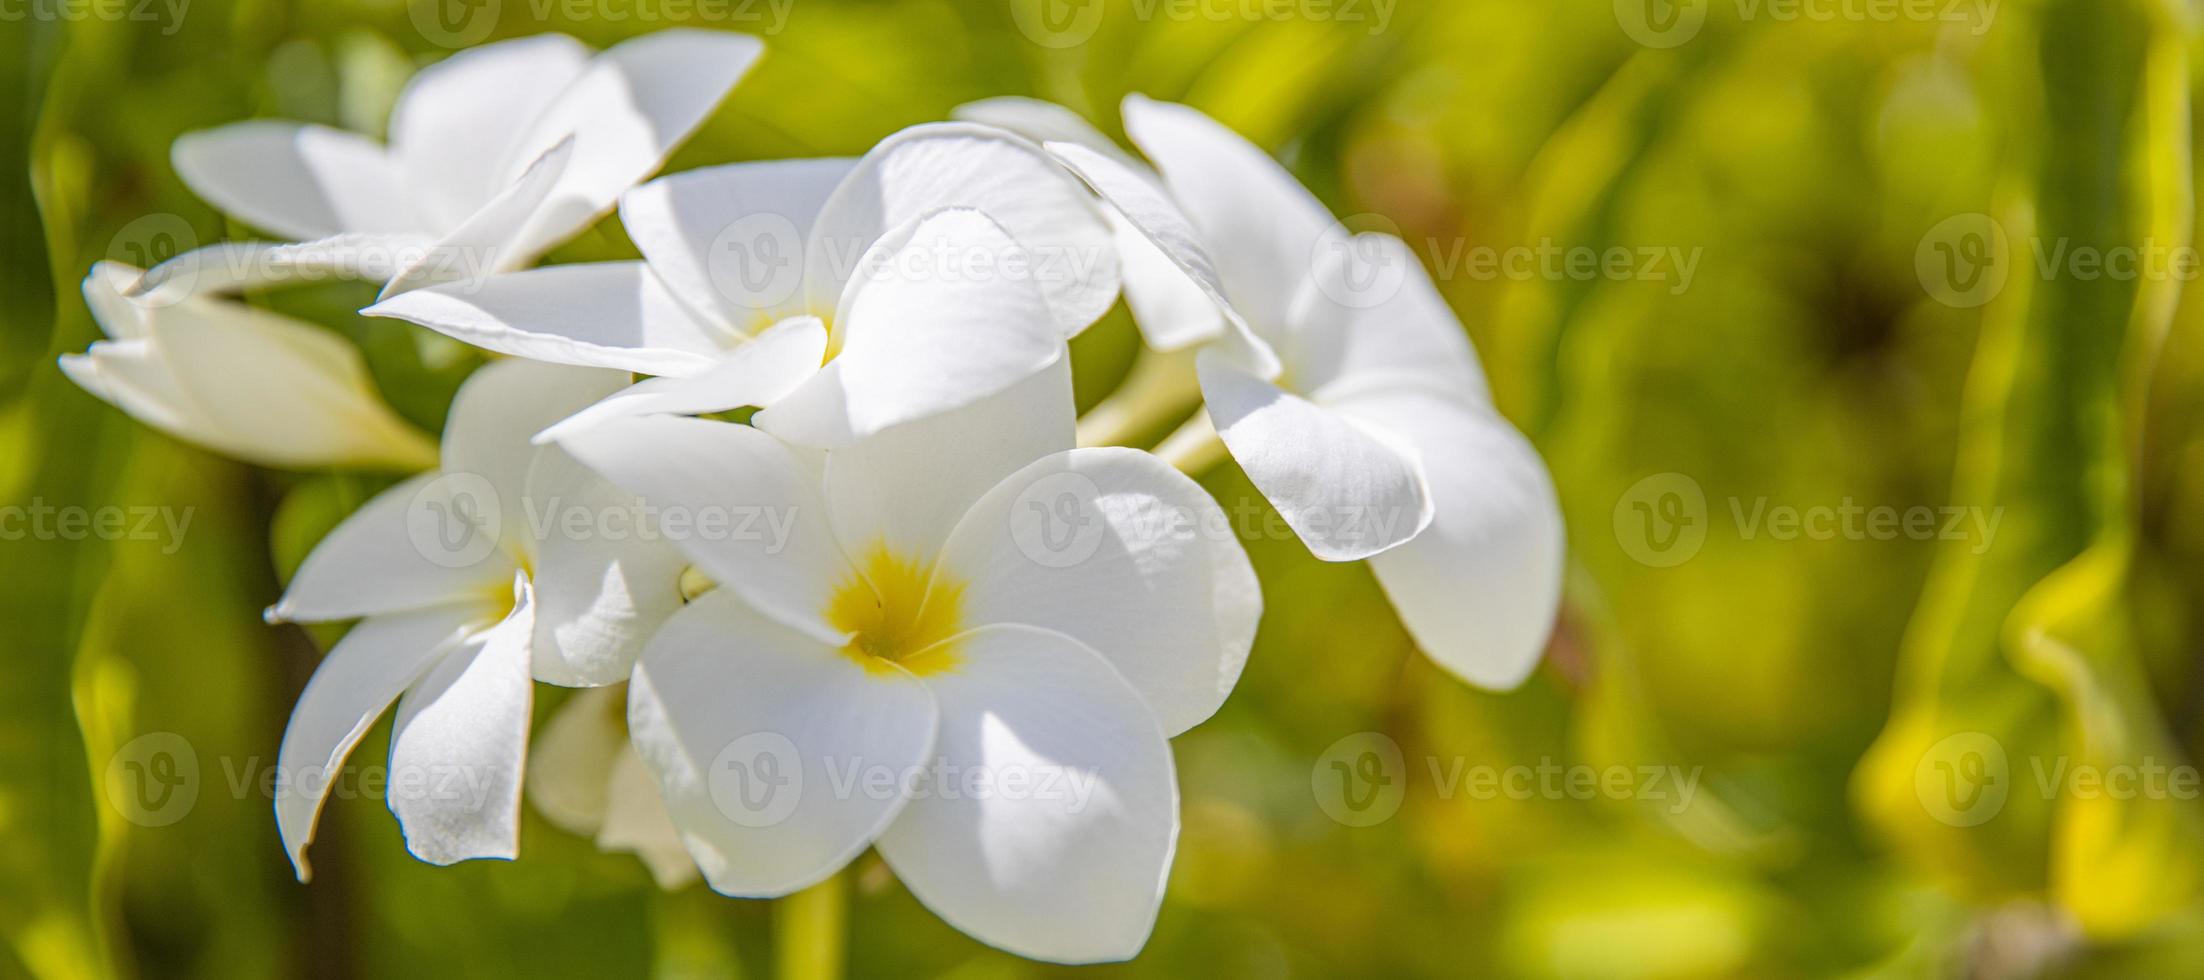 White and yellow plumeria flowers bunch blossom close up, green leaves blurred bokeh background, blooming frangipani tree branch, exotic tropical flower in bloom, beautiful natural floral arrangement photo